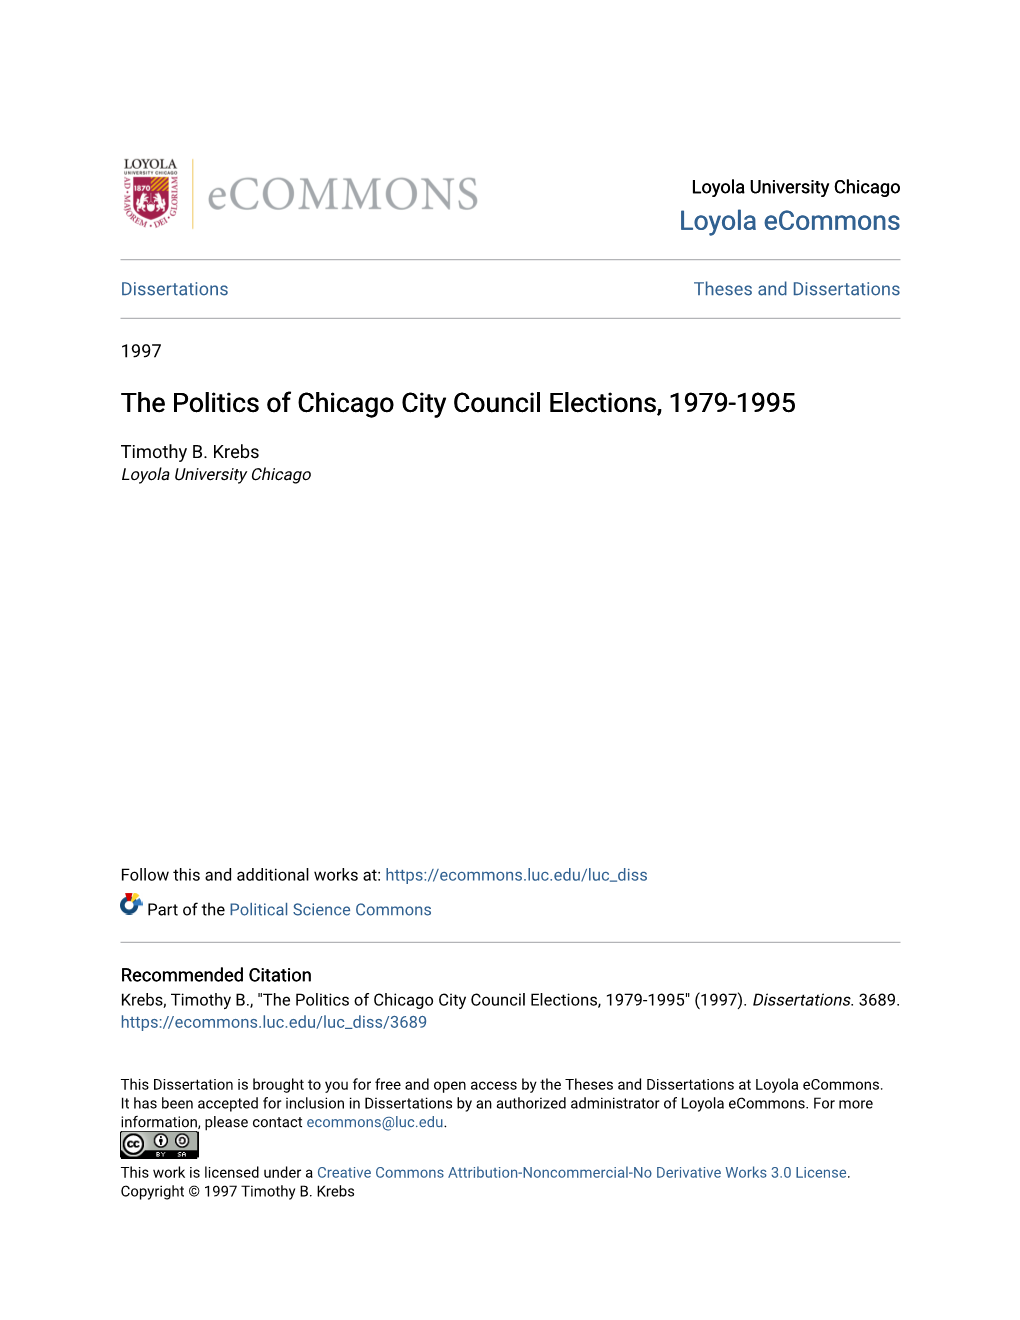 The Politics of Chicago City Council Elections, 1979-1995